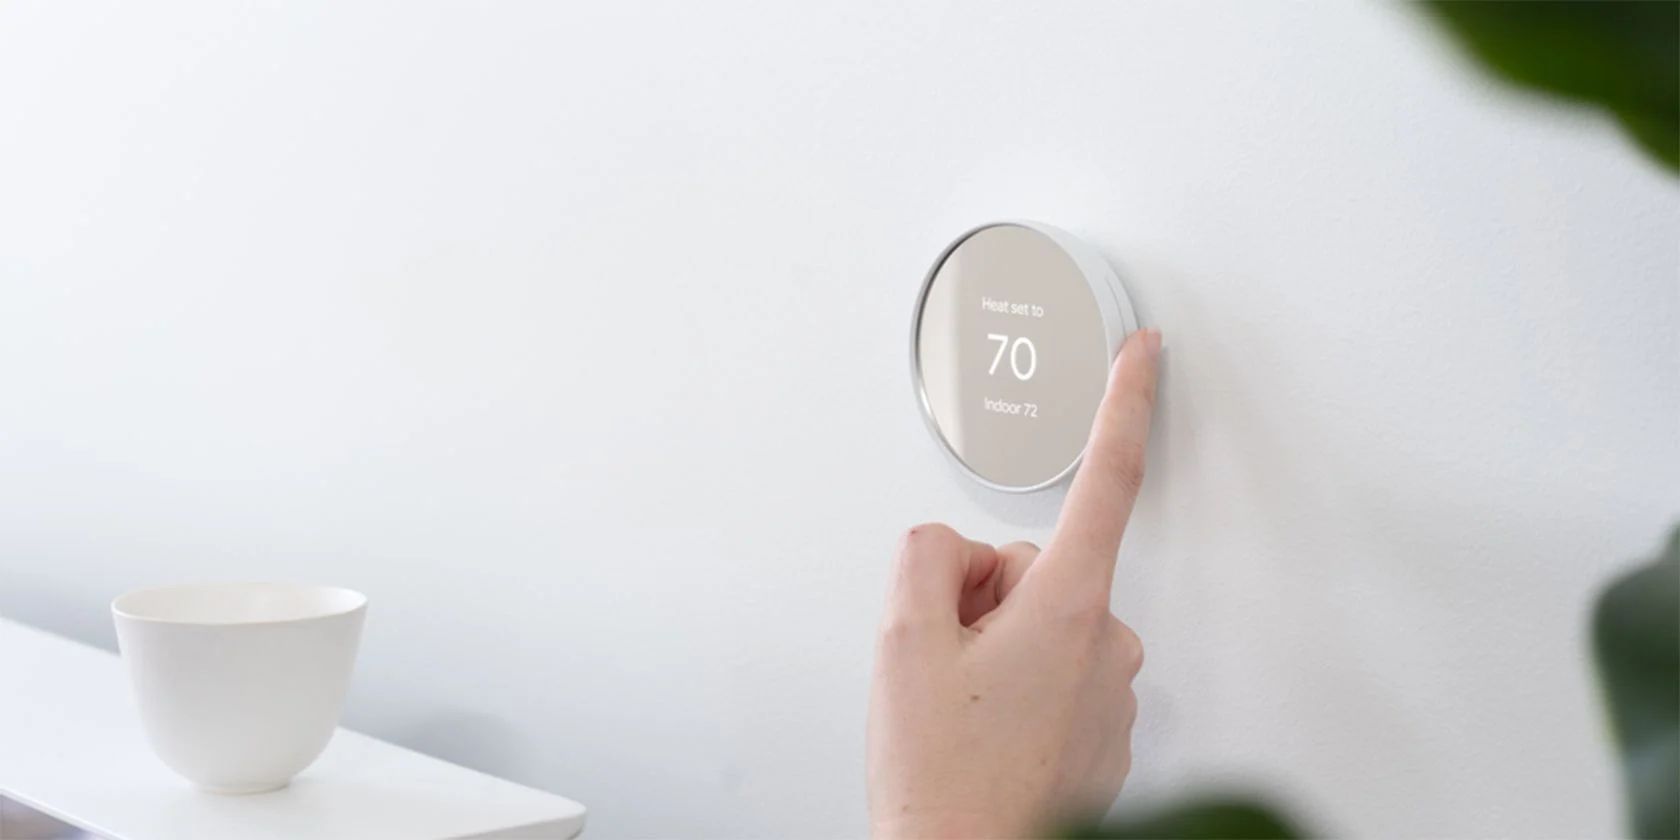 How to Set Up Your Nest Thermostat